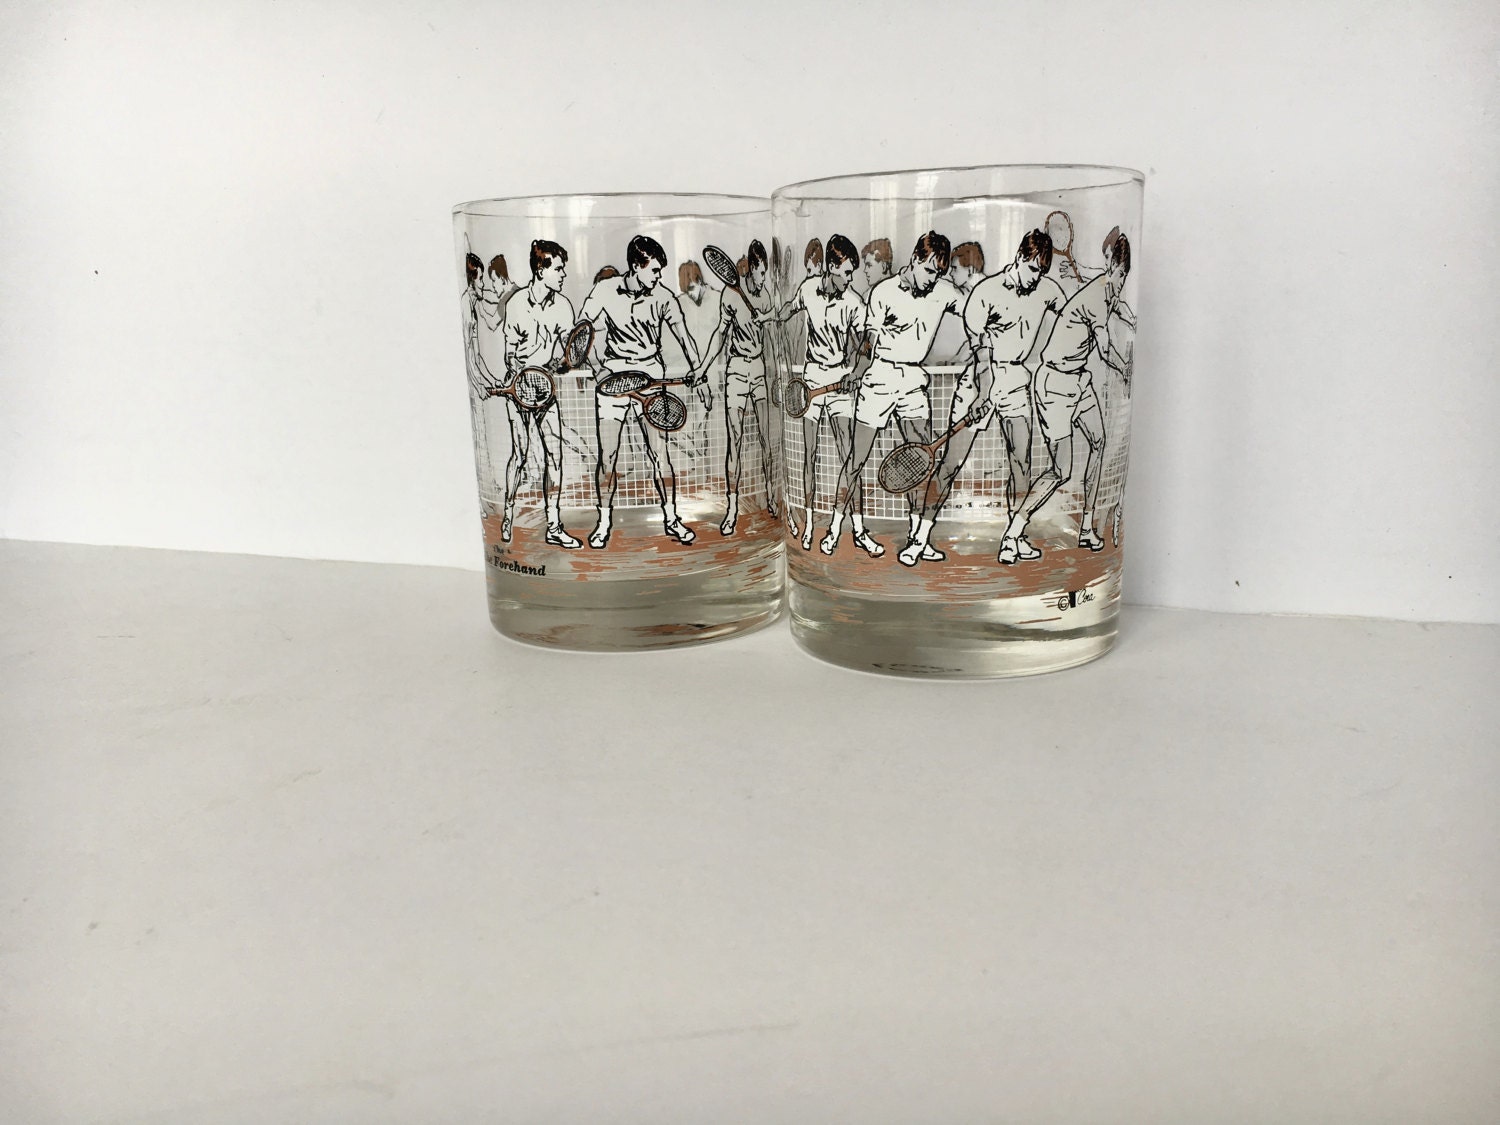 Two Vintage Double Old Fashioned Glasses From Cera Glass Cora W in Vintage Old Fashioned Glasses for Your choice